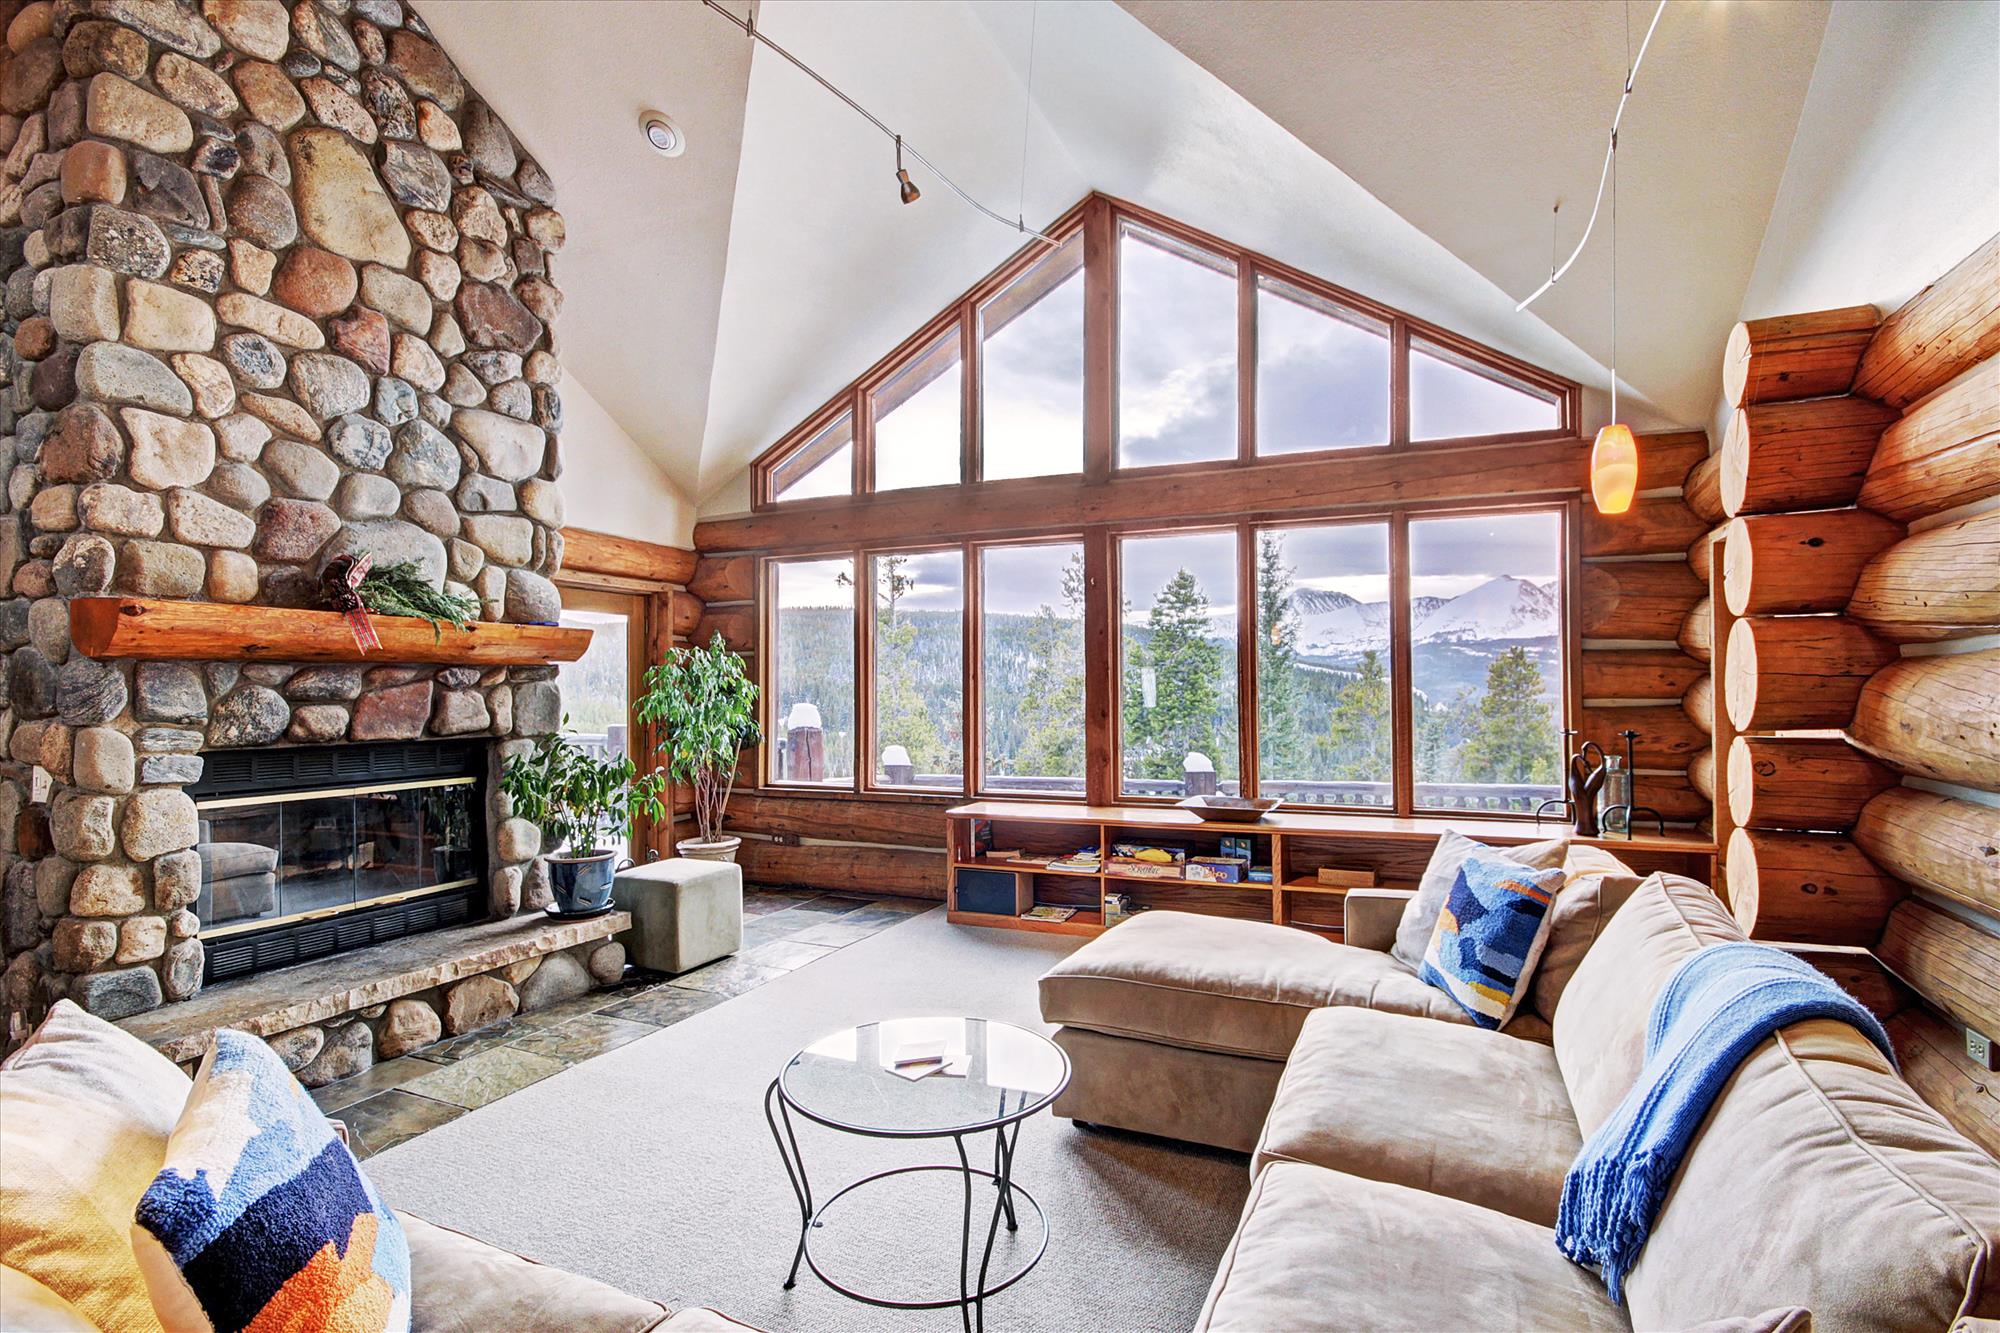 Enjoy this private home with amazing panoramic views of the Ten Mile Range and Breckenridge ski area - 10 Southface Breckenridge Vacation Rental